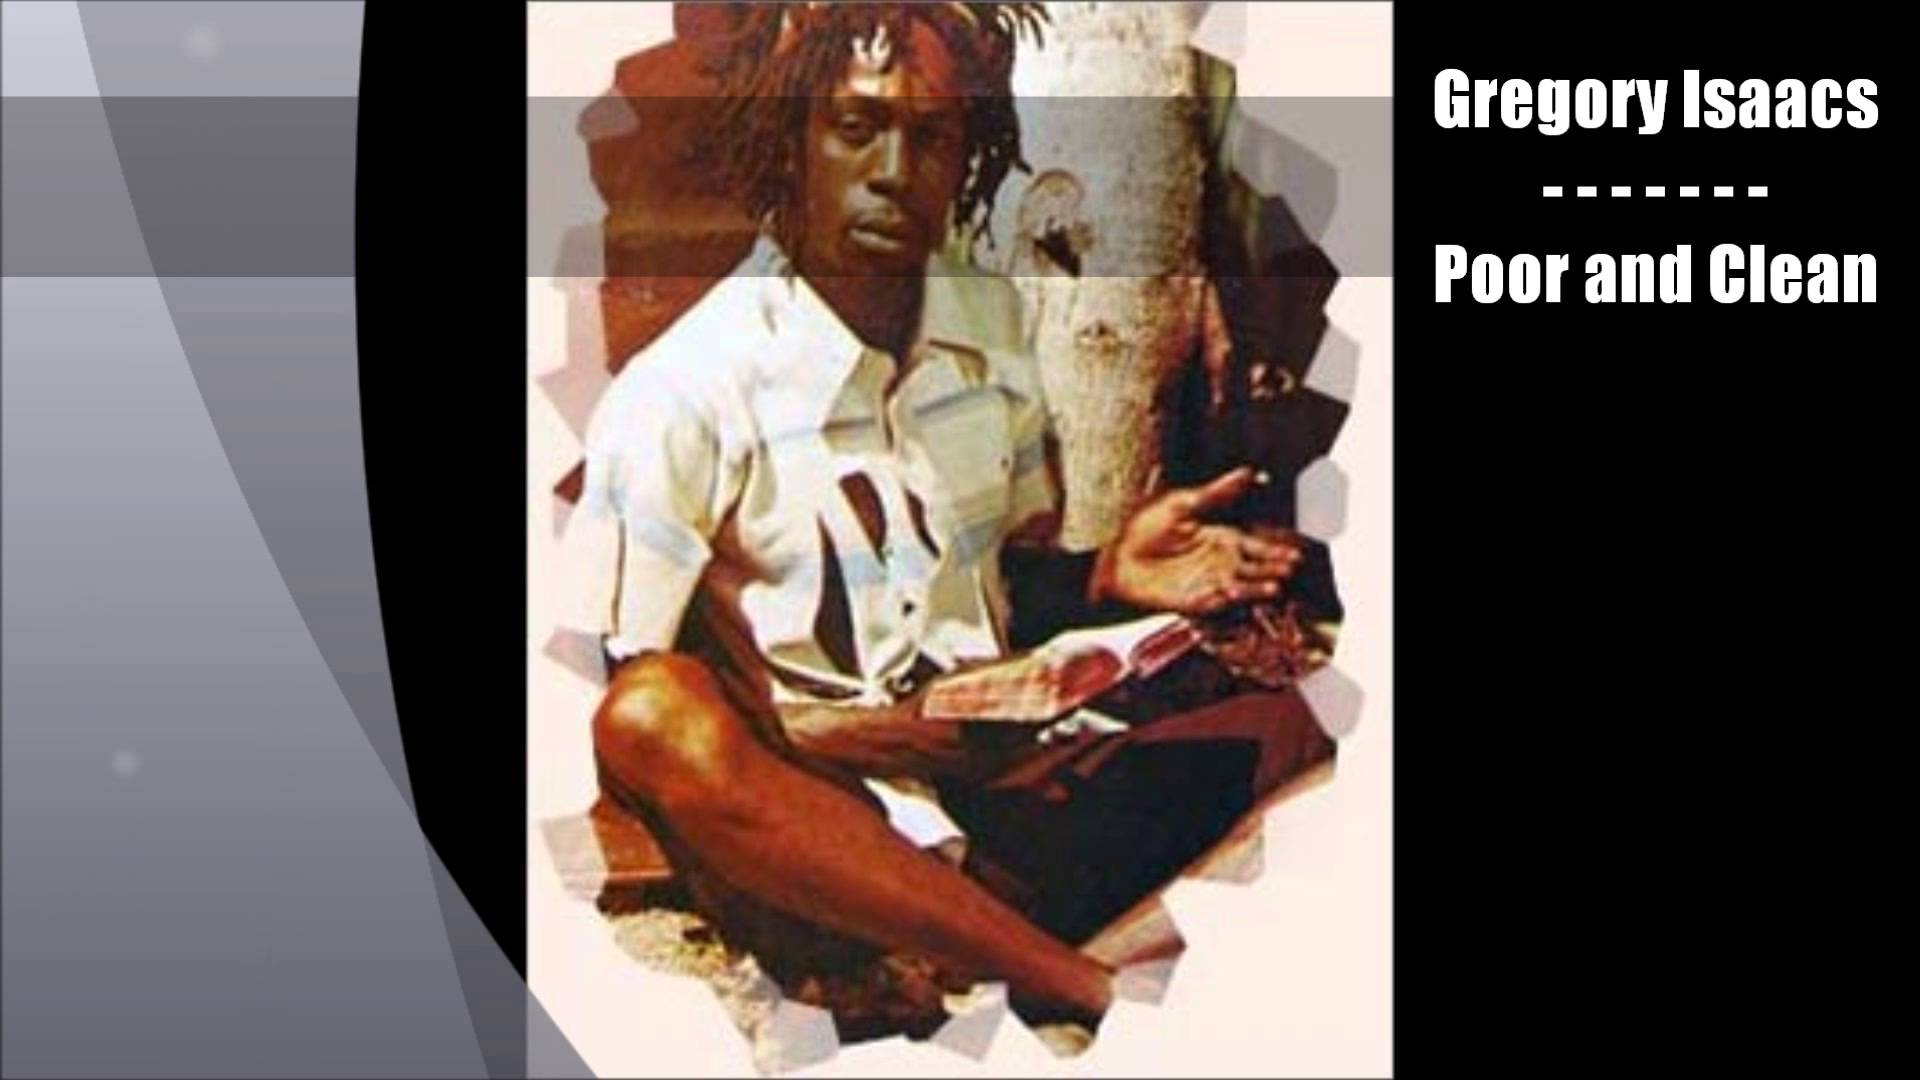 Gregory Isaacs: Poor and Clean